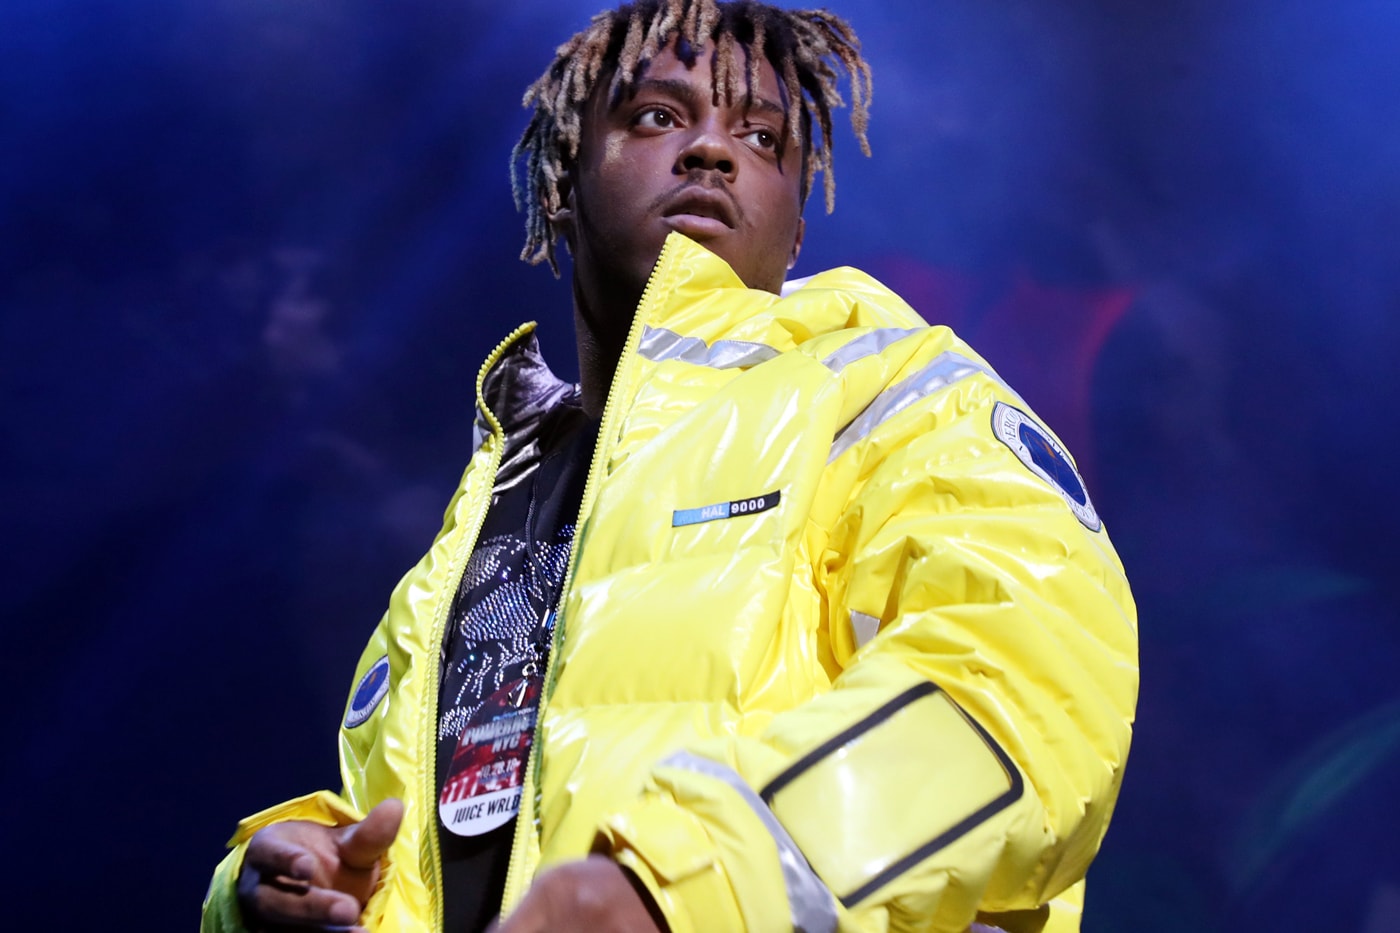 juice wrld danny wolf motions stream new official version single music song